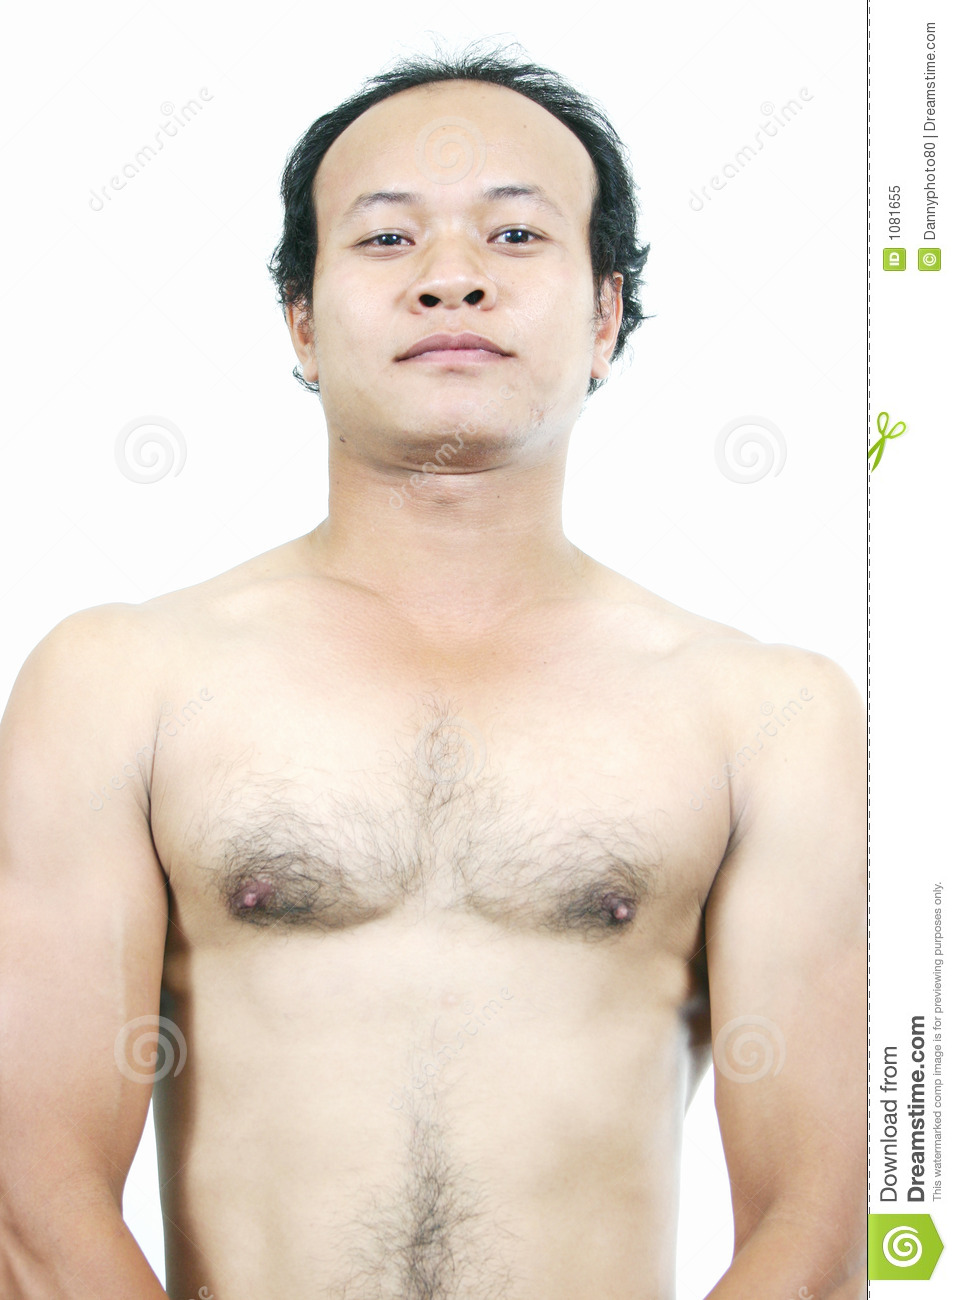 Muscle Guy 1 Royalty Free Stock Photo   Image  1081655